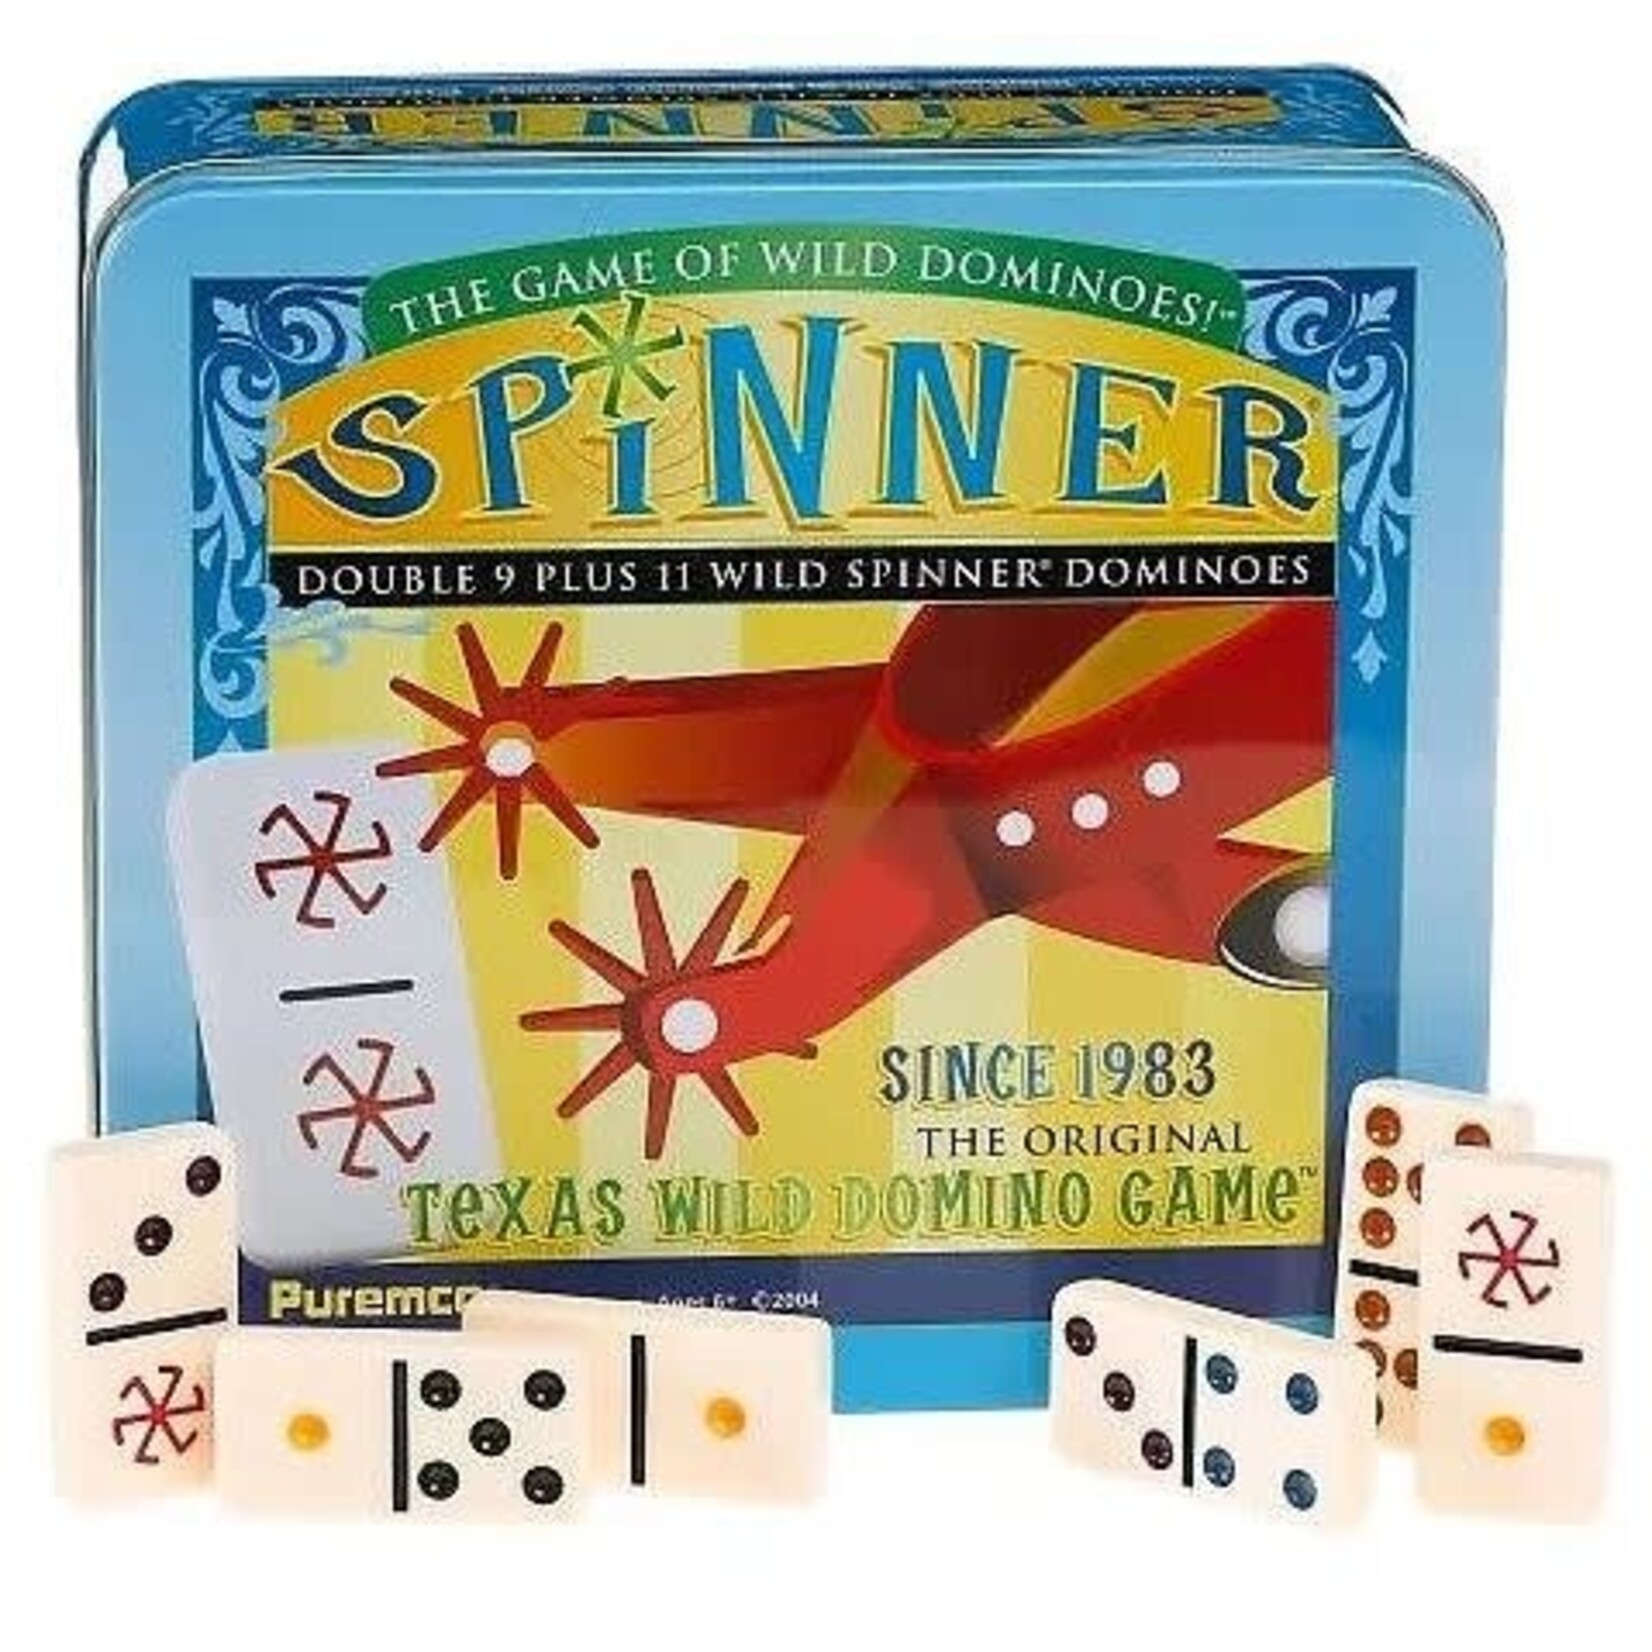 #18575 Spinner Dominoes: Dragon Cache Used Game